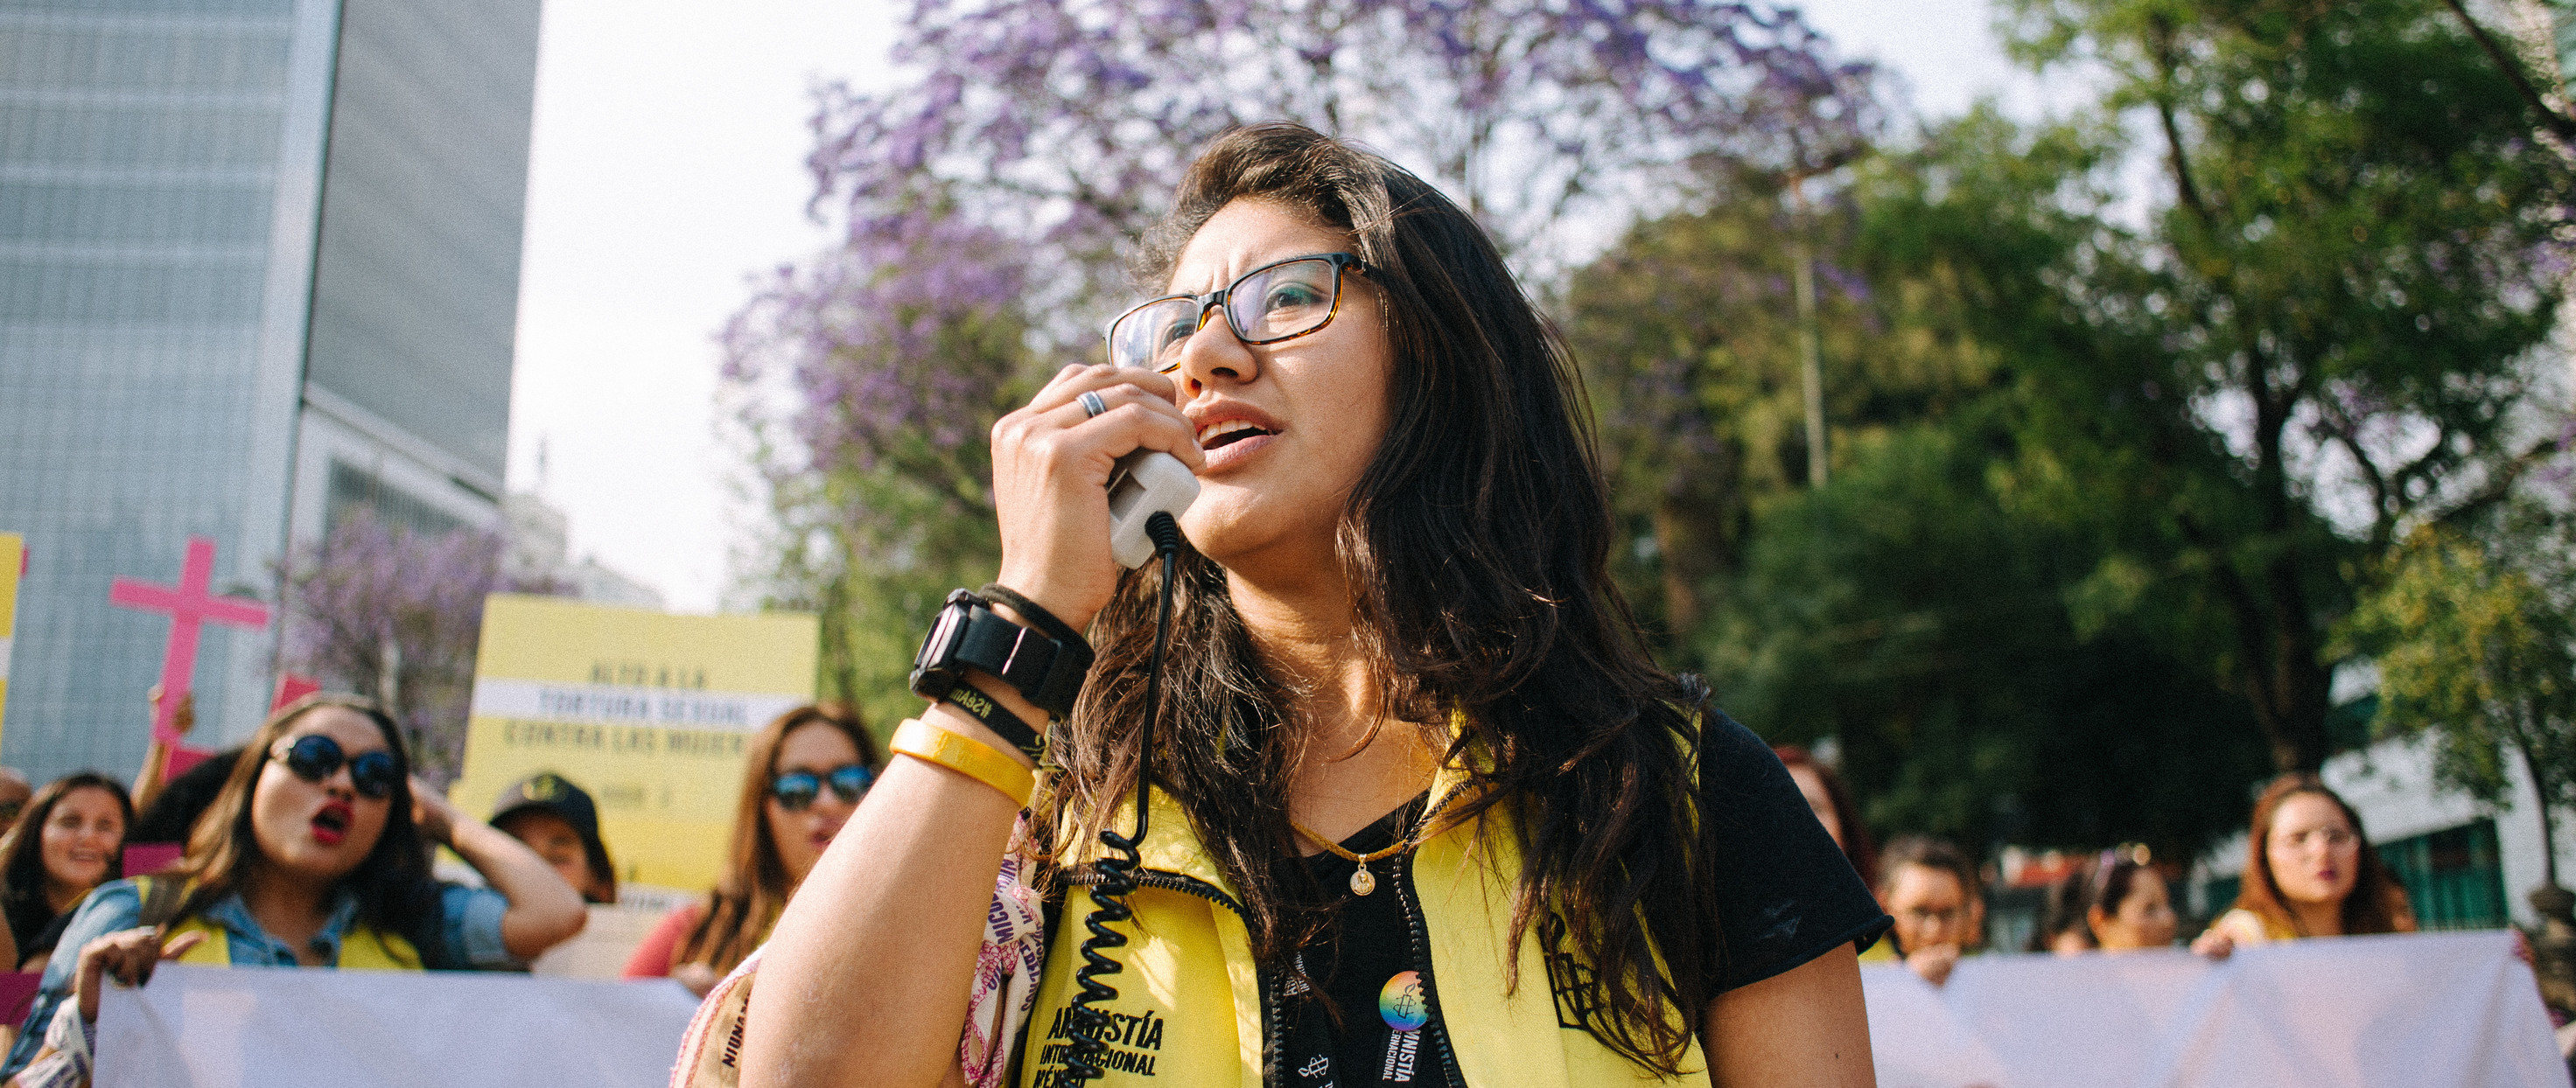 A woman speaks into a megaphone at a protest in Mexico.